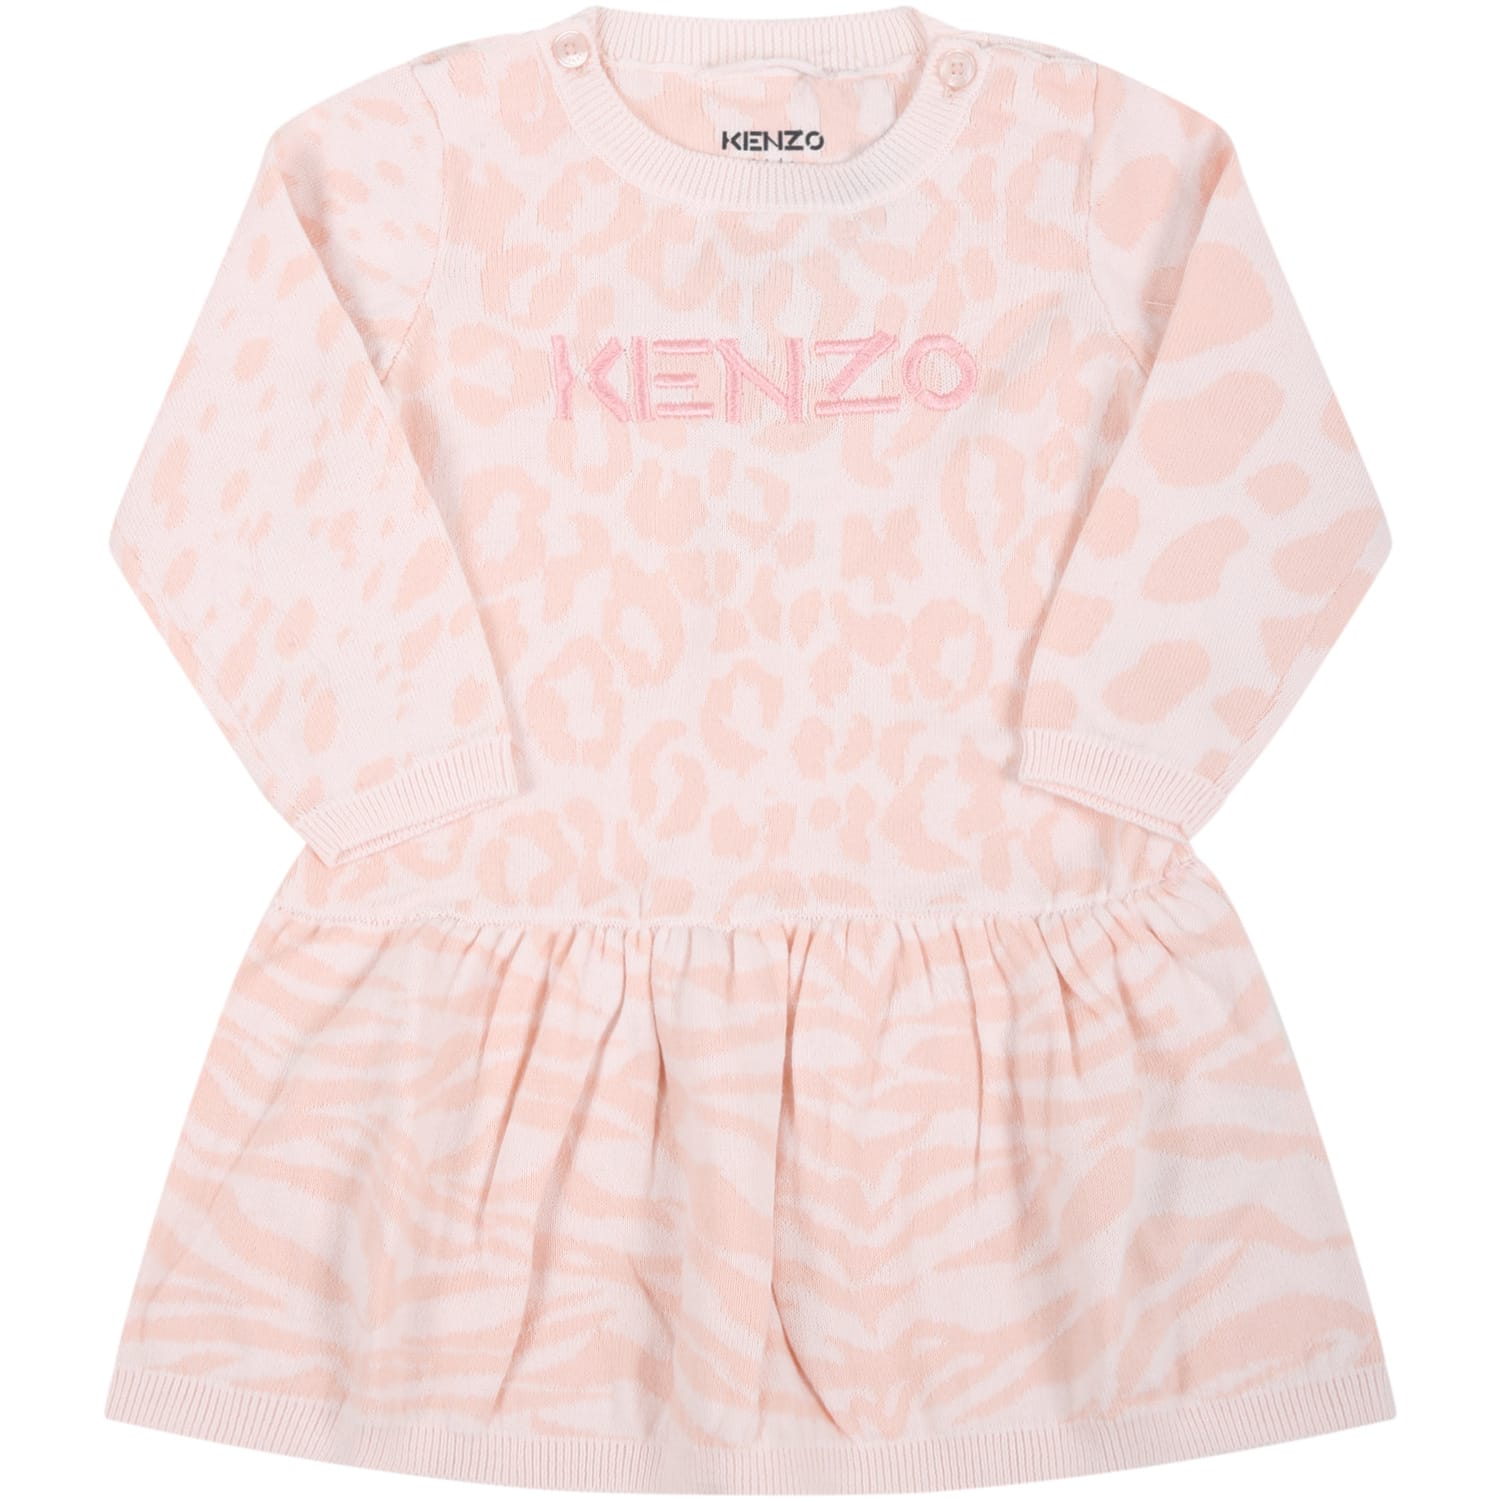 Kenzo Kids Pink Dress For Baby Girl With Logo